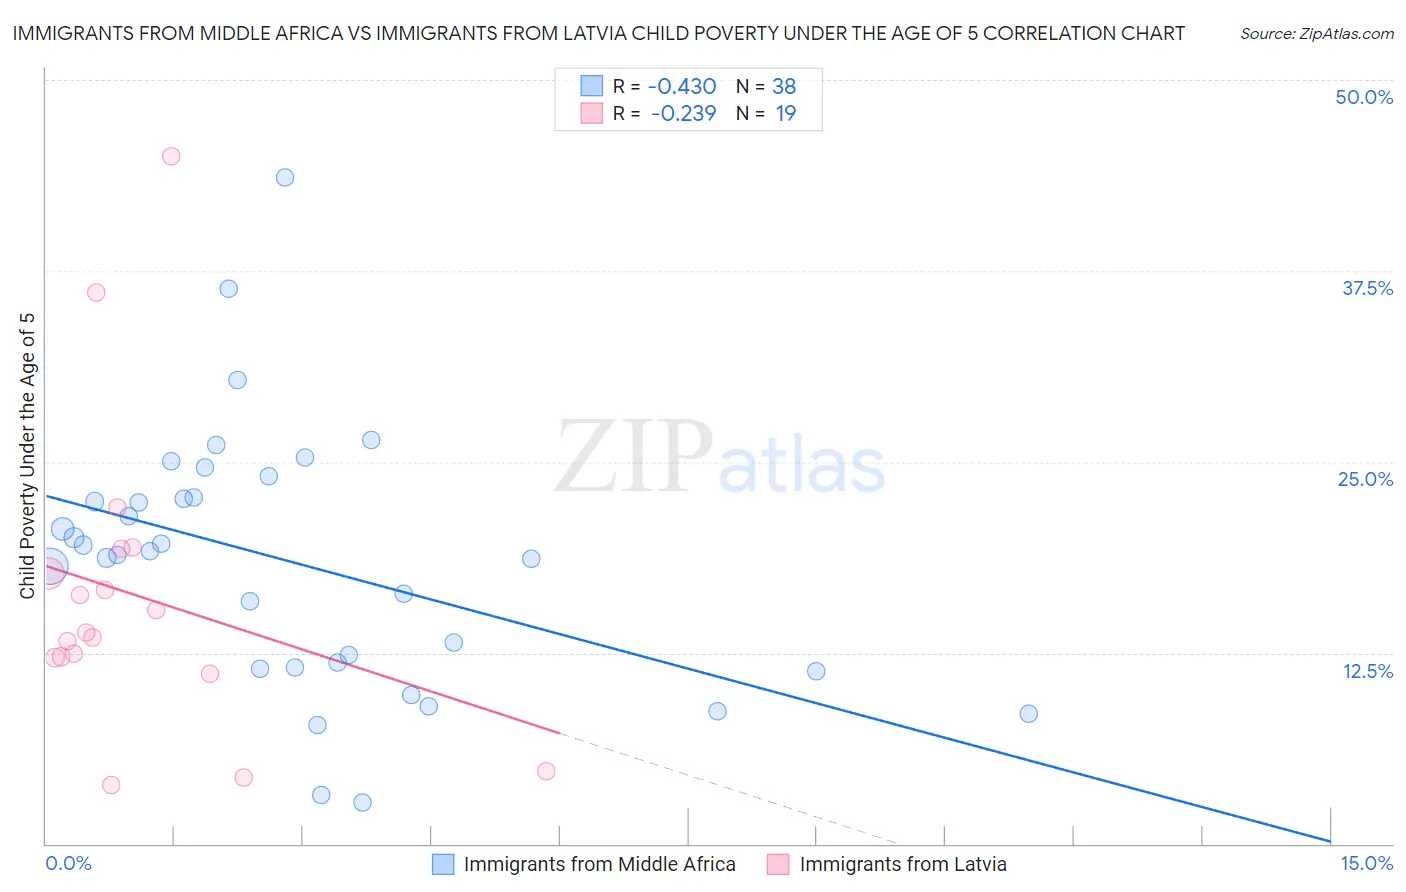 Immigrants from Middle Africa vs Immigrants from Latvia Child Poverty Under the Age of 5